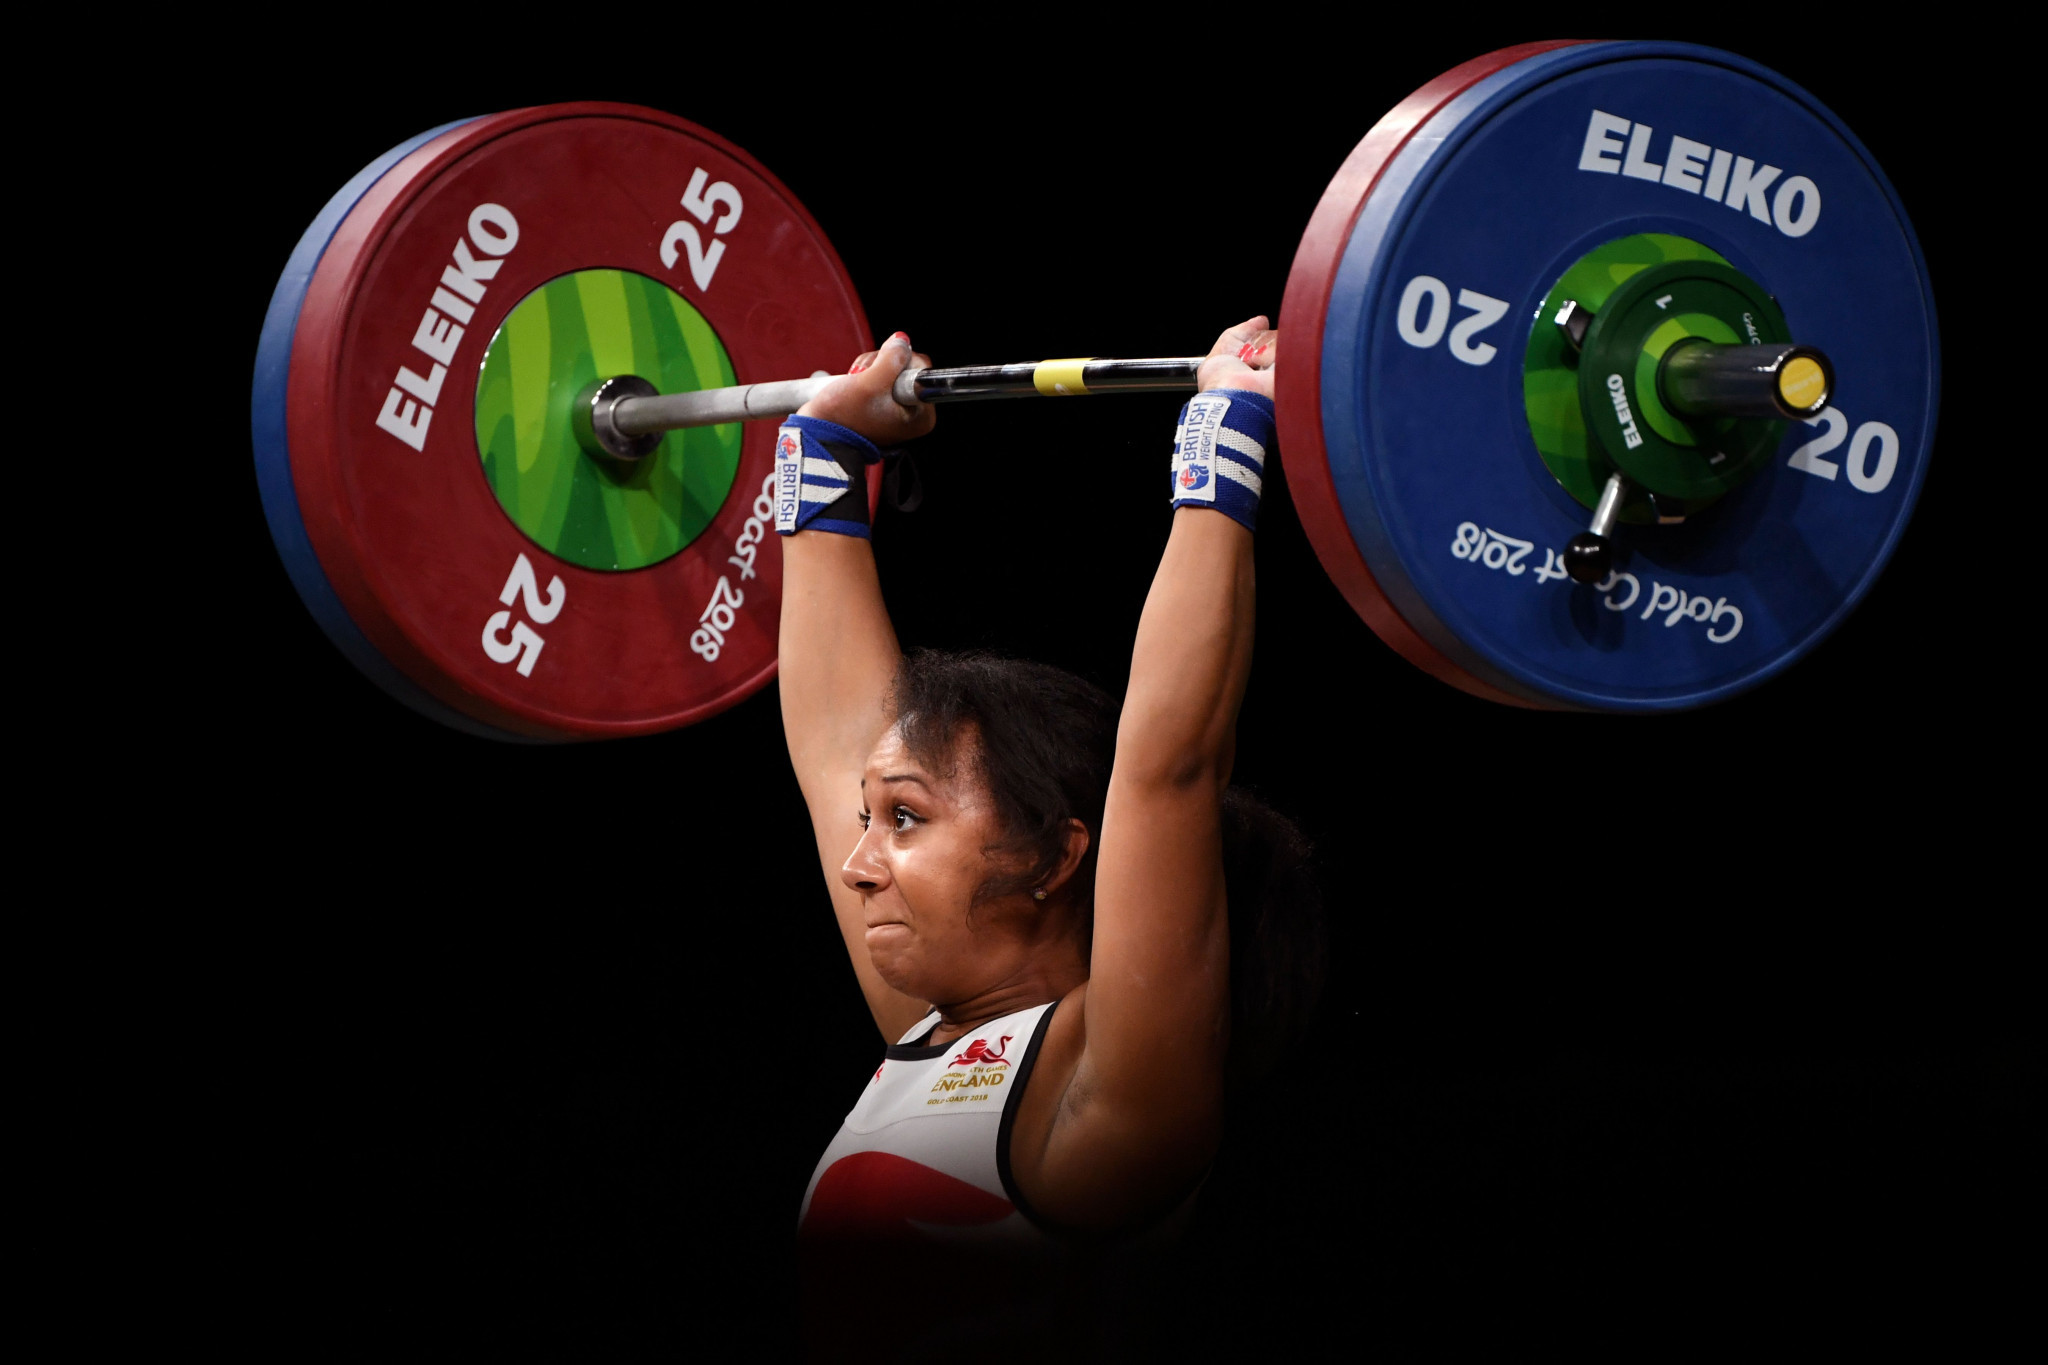 Britain's Zoe Smith won a European bronze medal last year, and Urso says more countries appearing on weightlifting podiums would be a positive thing for the sport ©Getty Images